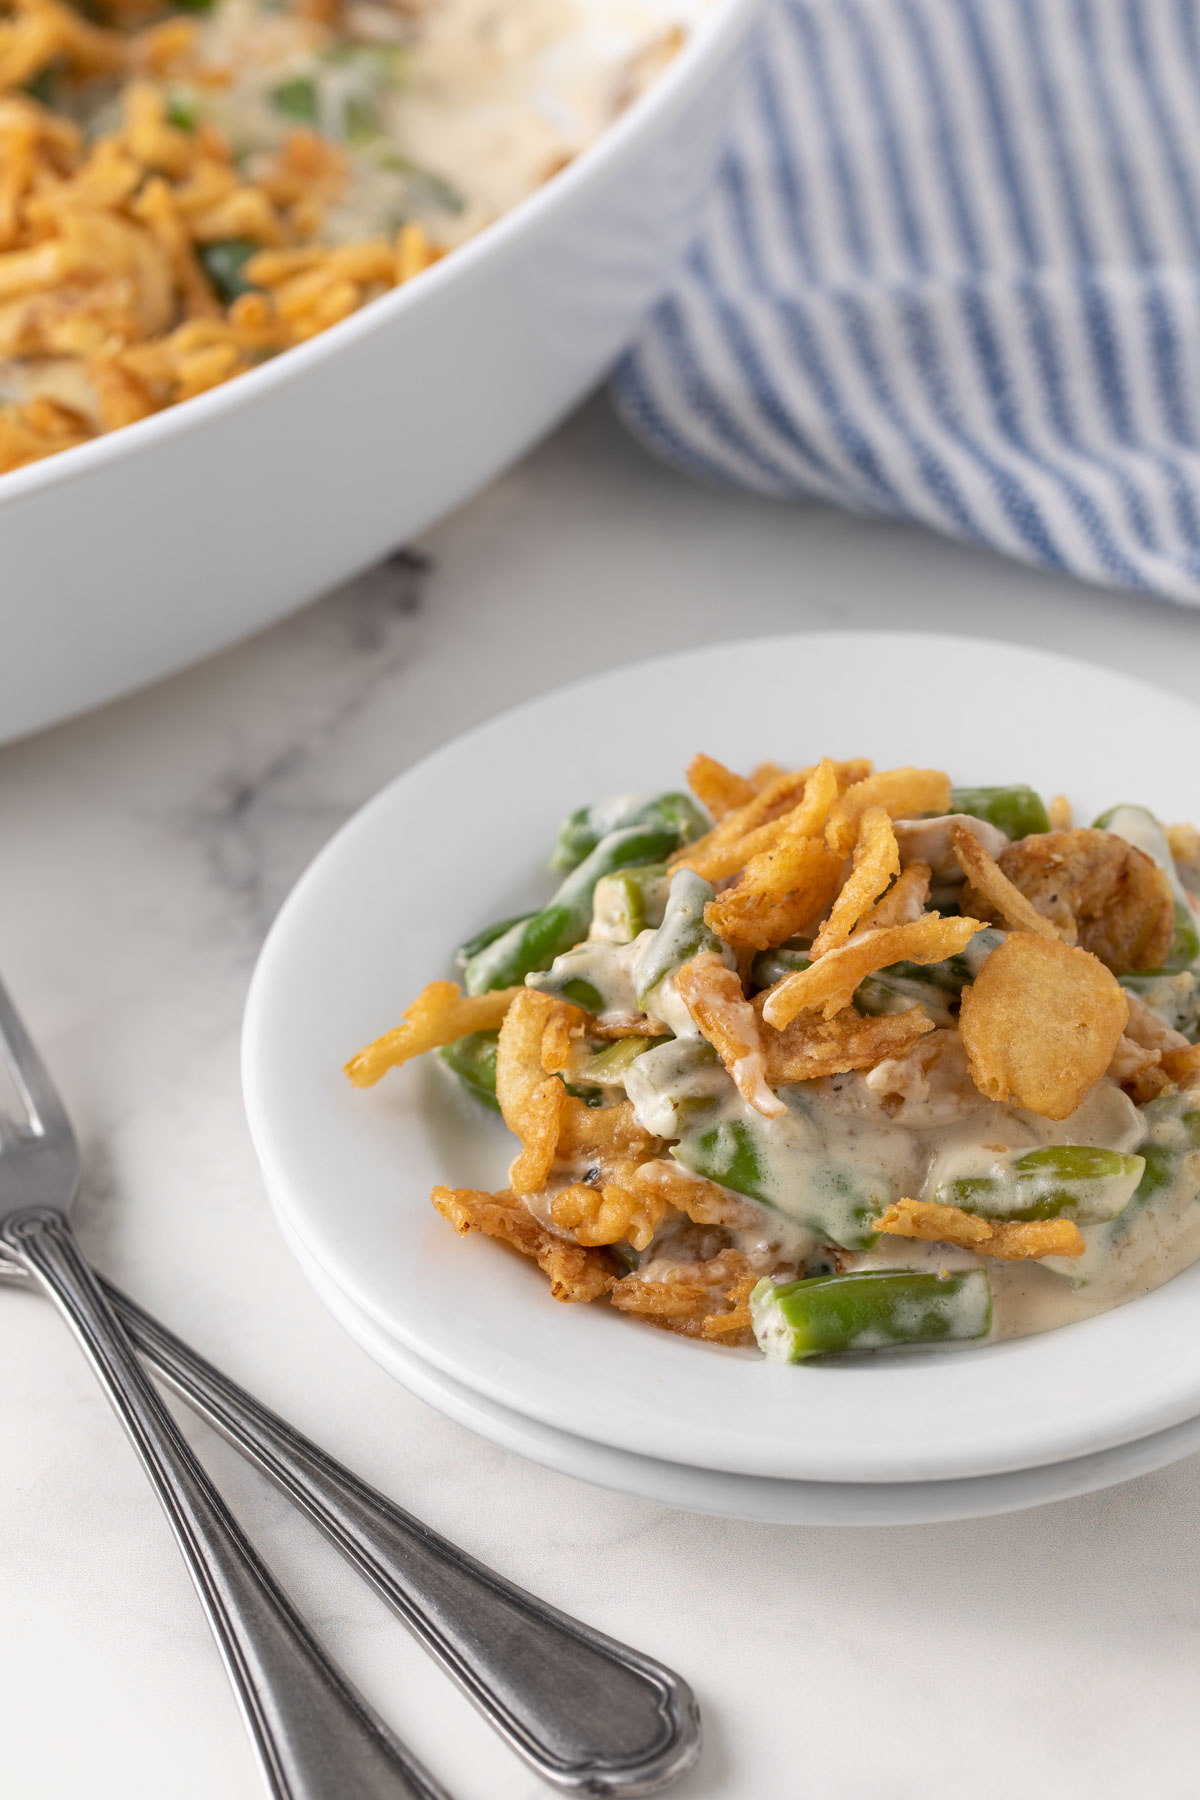 Green bean casserole on a round white plate beside two forks.